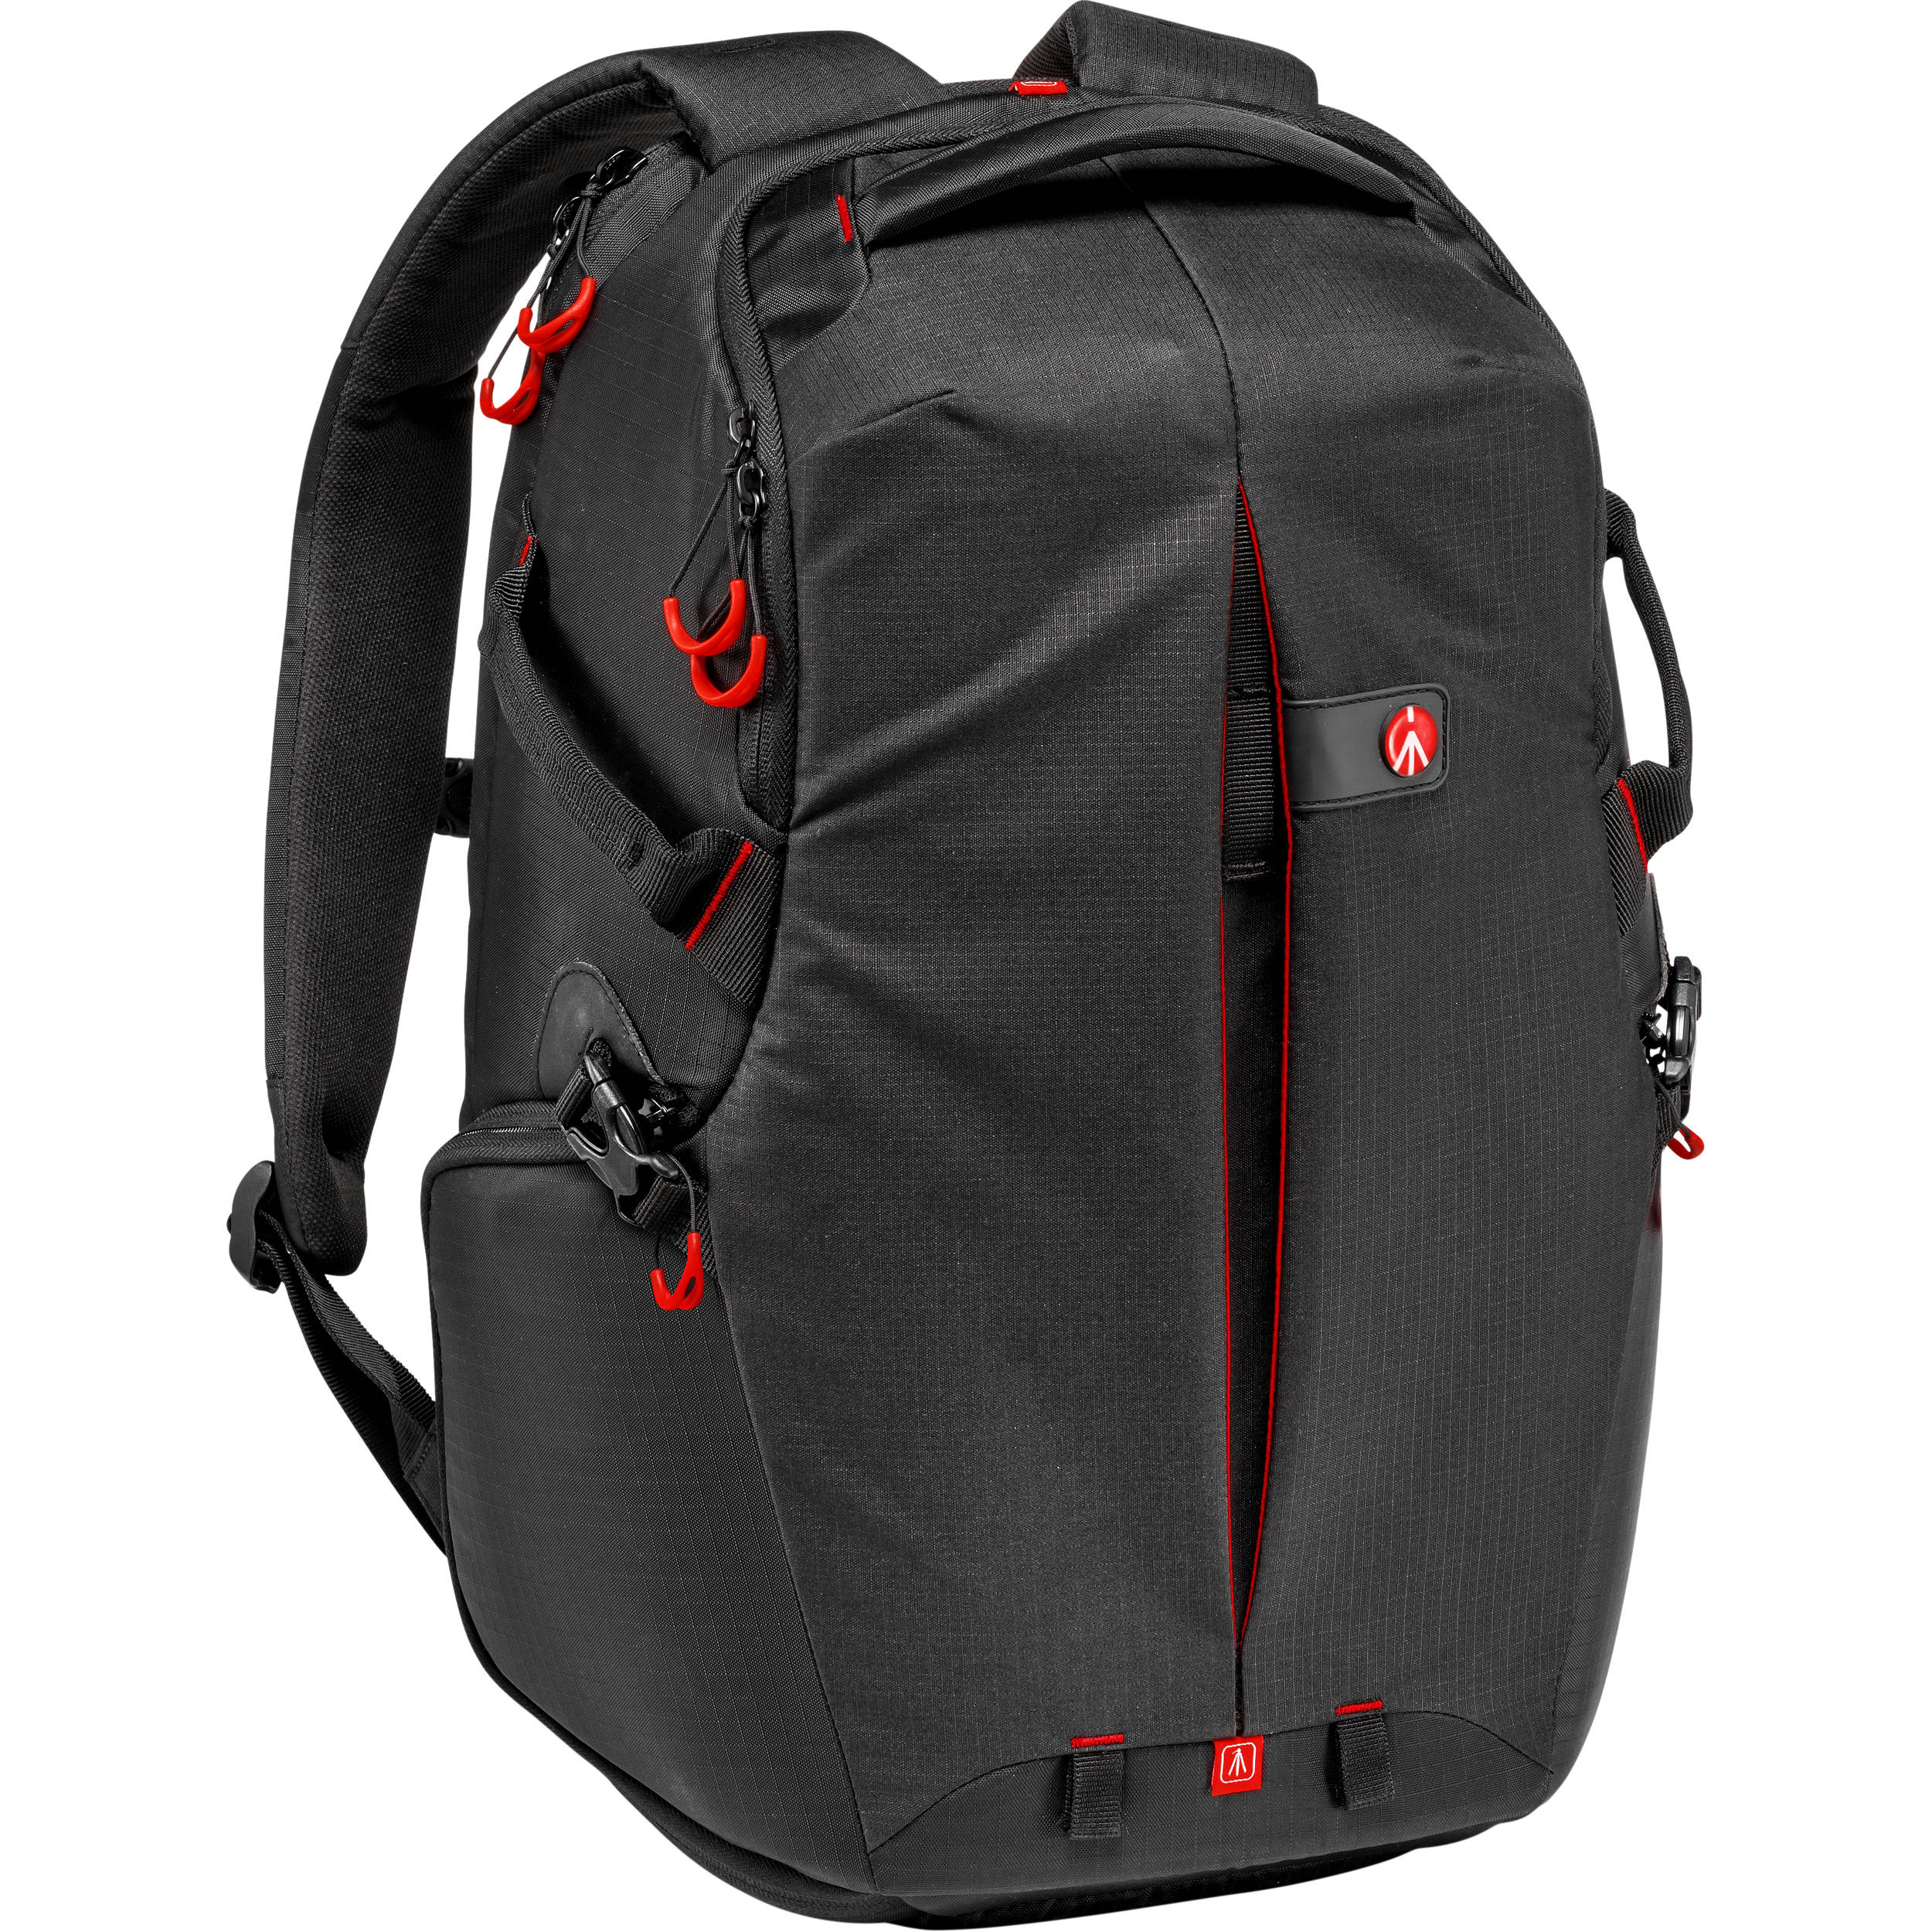 Manfrotto Pro Light RedBee-210 Backpack (Black) –